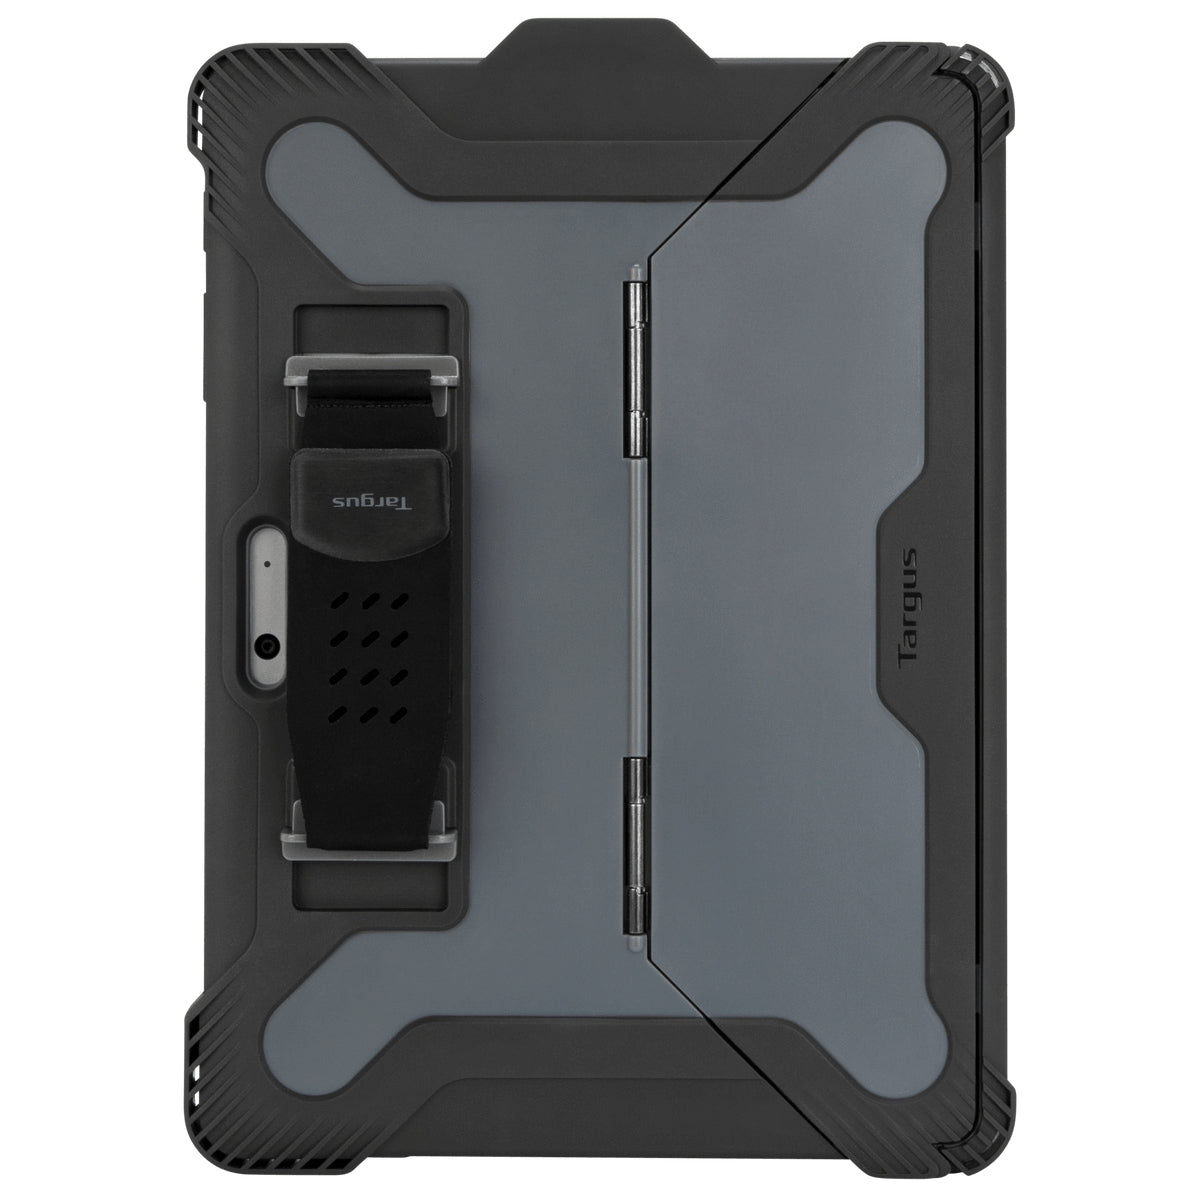 Funda Para Tablet Targus Thd491Gl Safeport Rugged Max Para Microsoft Surface Go 2 Y Surface Go Color Negro/Gris